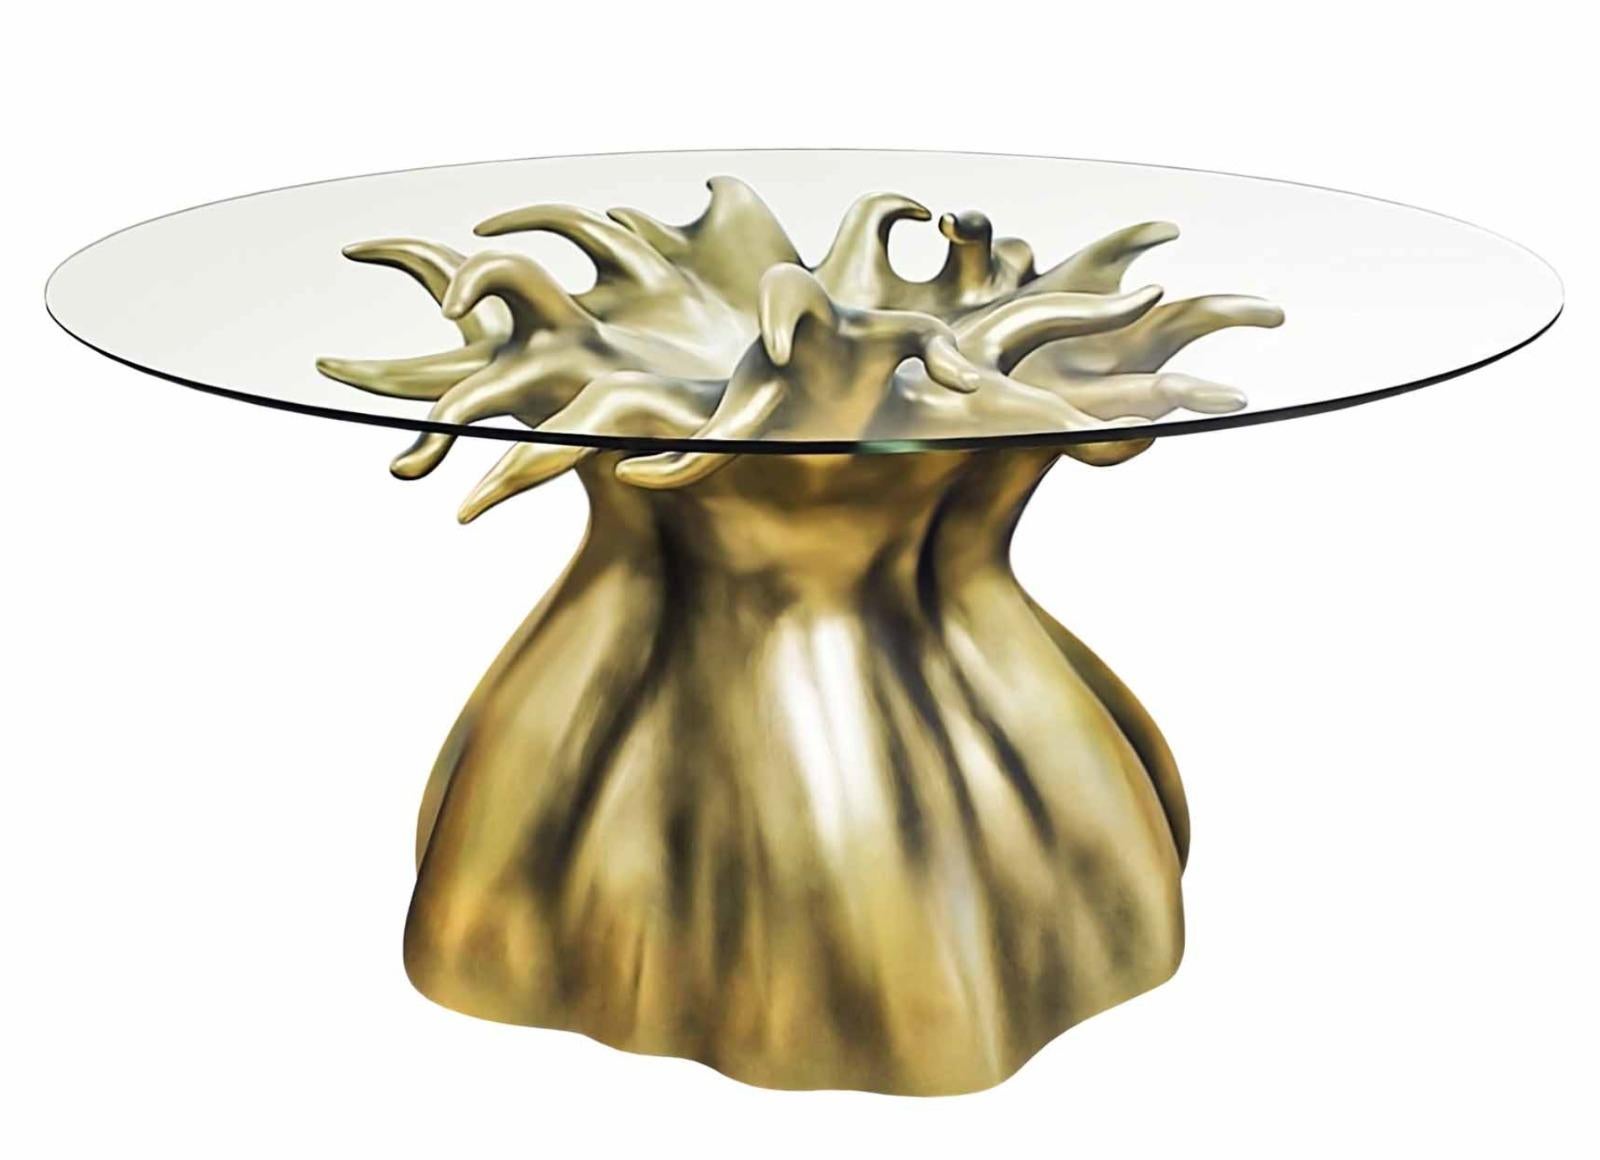 Dining table

General information
Dimensions (cm): Ø160 x 75
Dimensions (in): Ø63 x 29.5
Seats: 8

Materials and colors
Top: Clear tempered glass 12 mm thick, with polished edge;
Base: Resin reinforced with fiberglass finished in aged gold